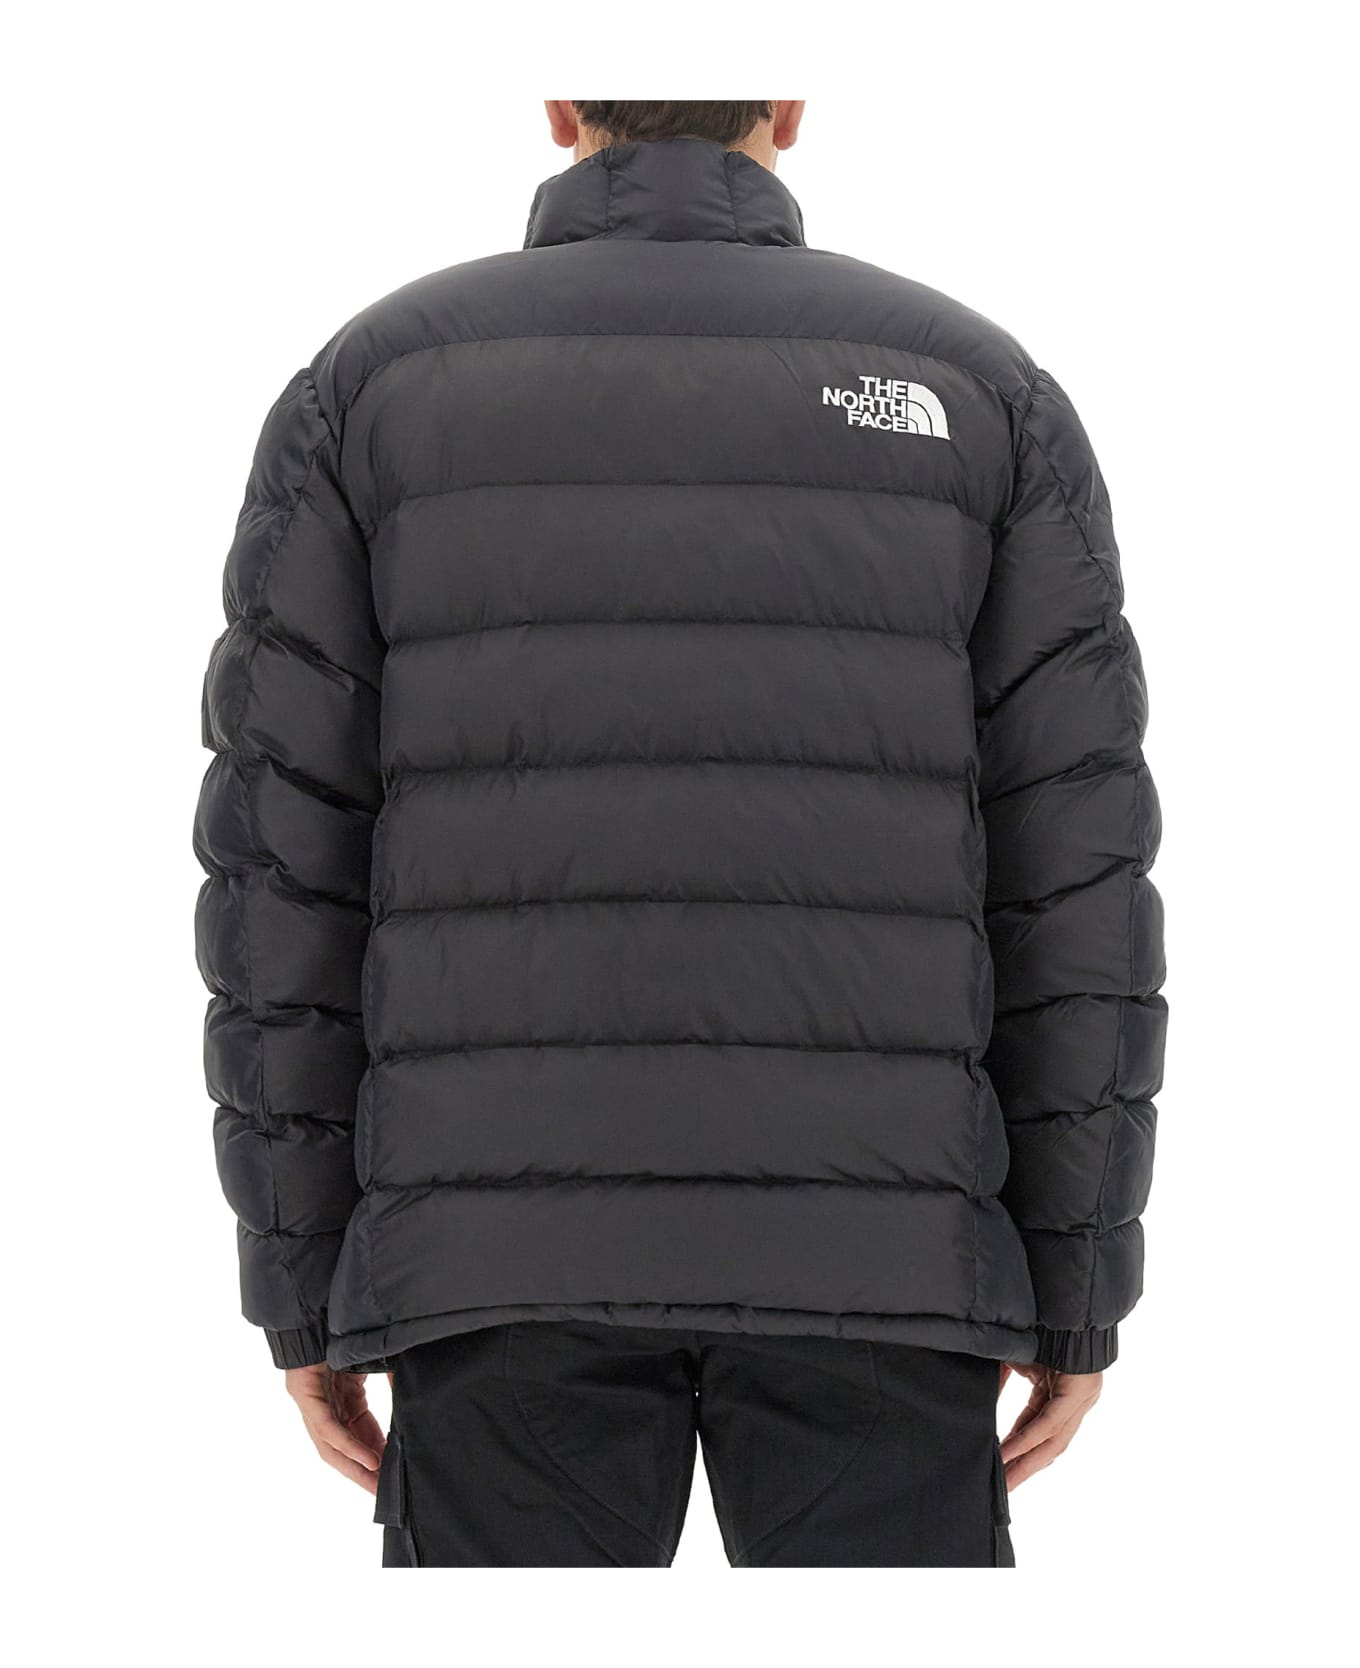 The North Face Jacket With Logo Print - Black